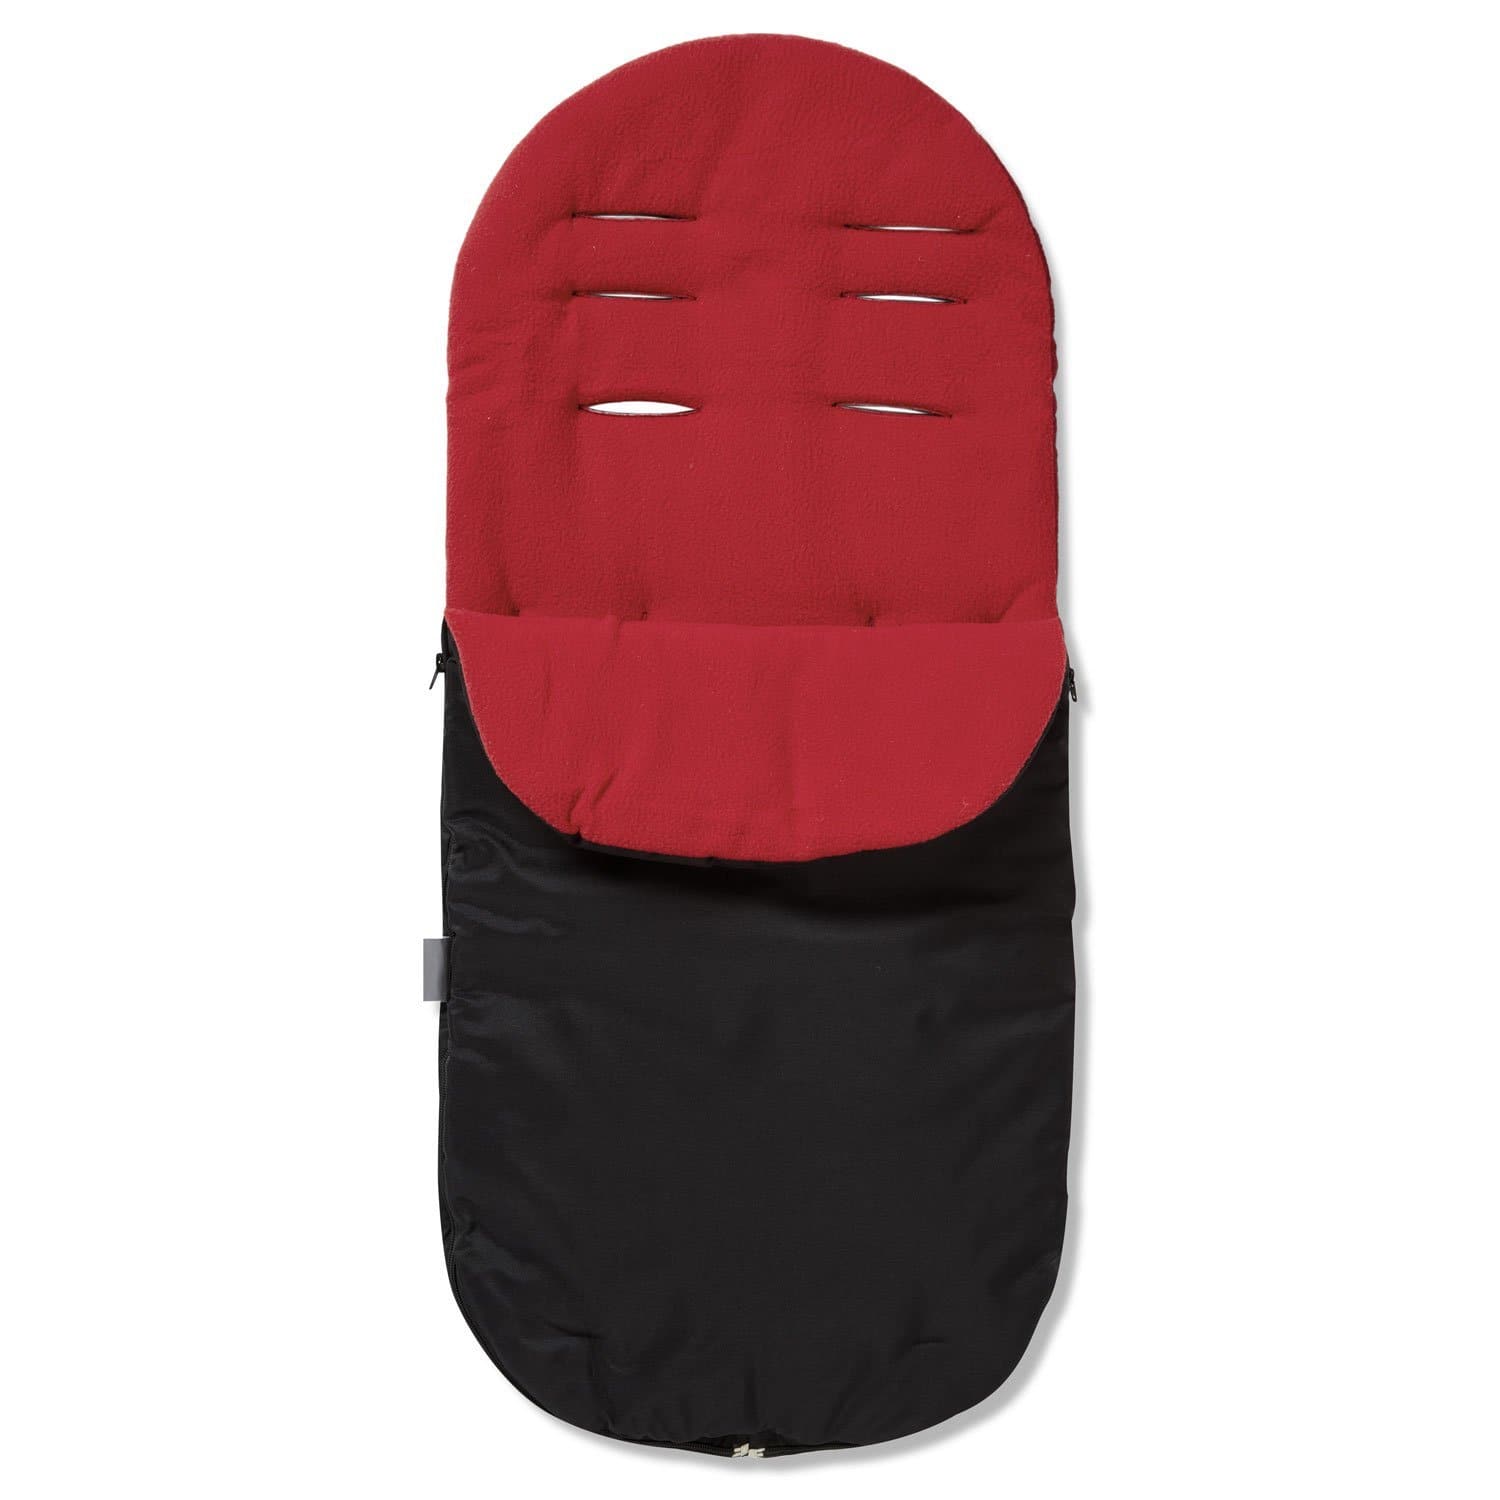 Footmuff / Cosy Toes Compatible with Casual - Red / Fits All Models | For Your Little One